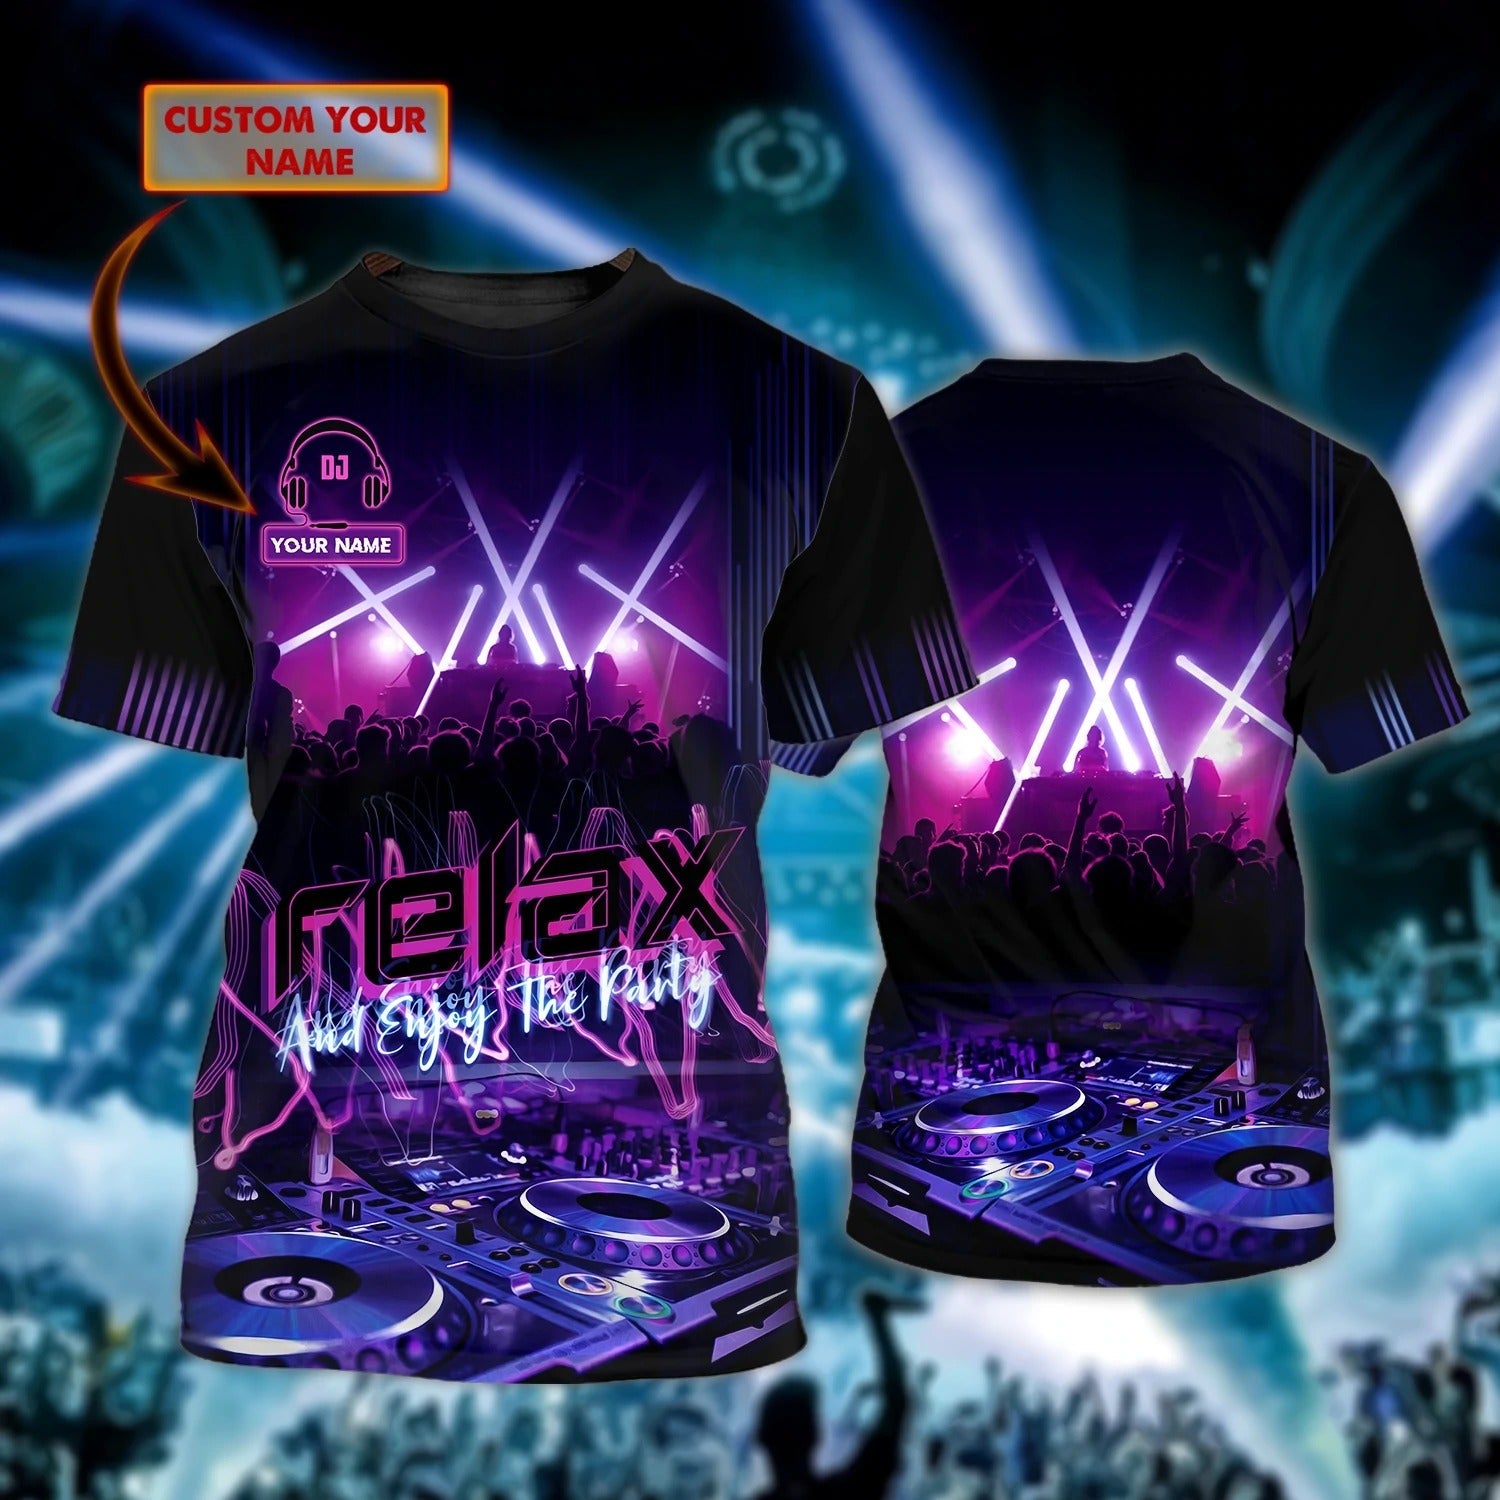 Personalized Dj 3D Cool T Shirt For Music Party/ Deejay Enjoy The Party And Relax Custom 3D Shirts For Men And Woman